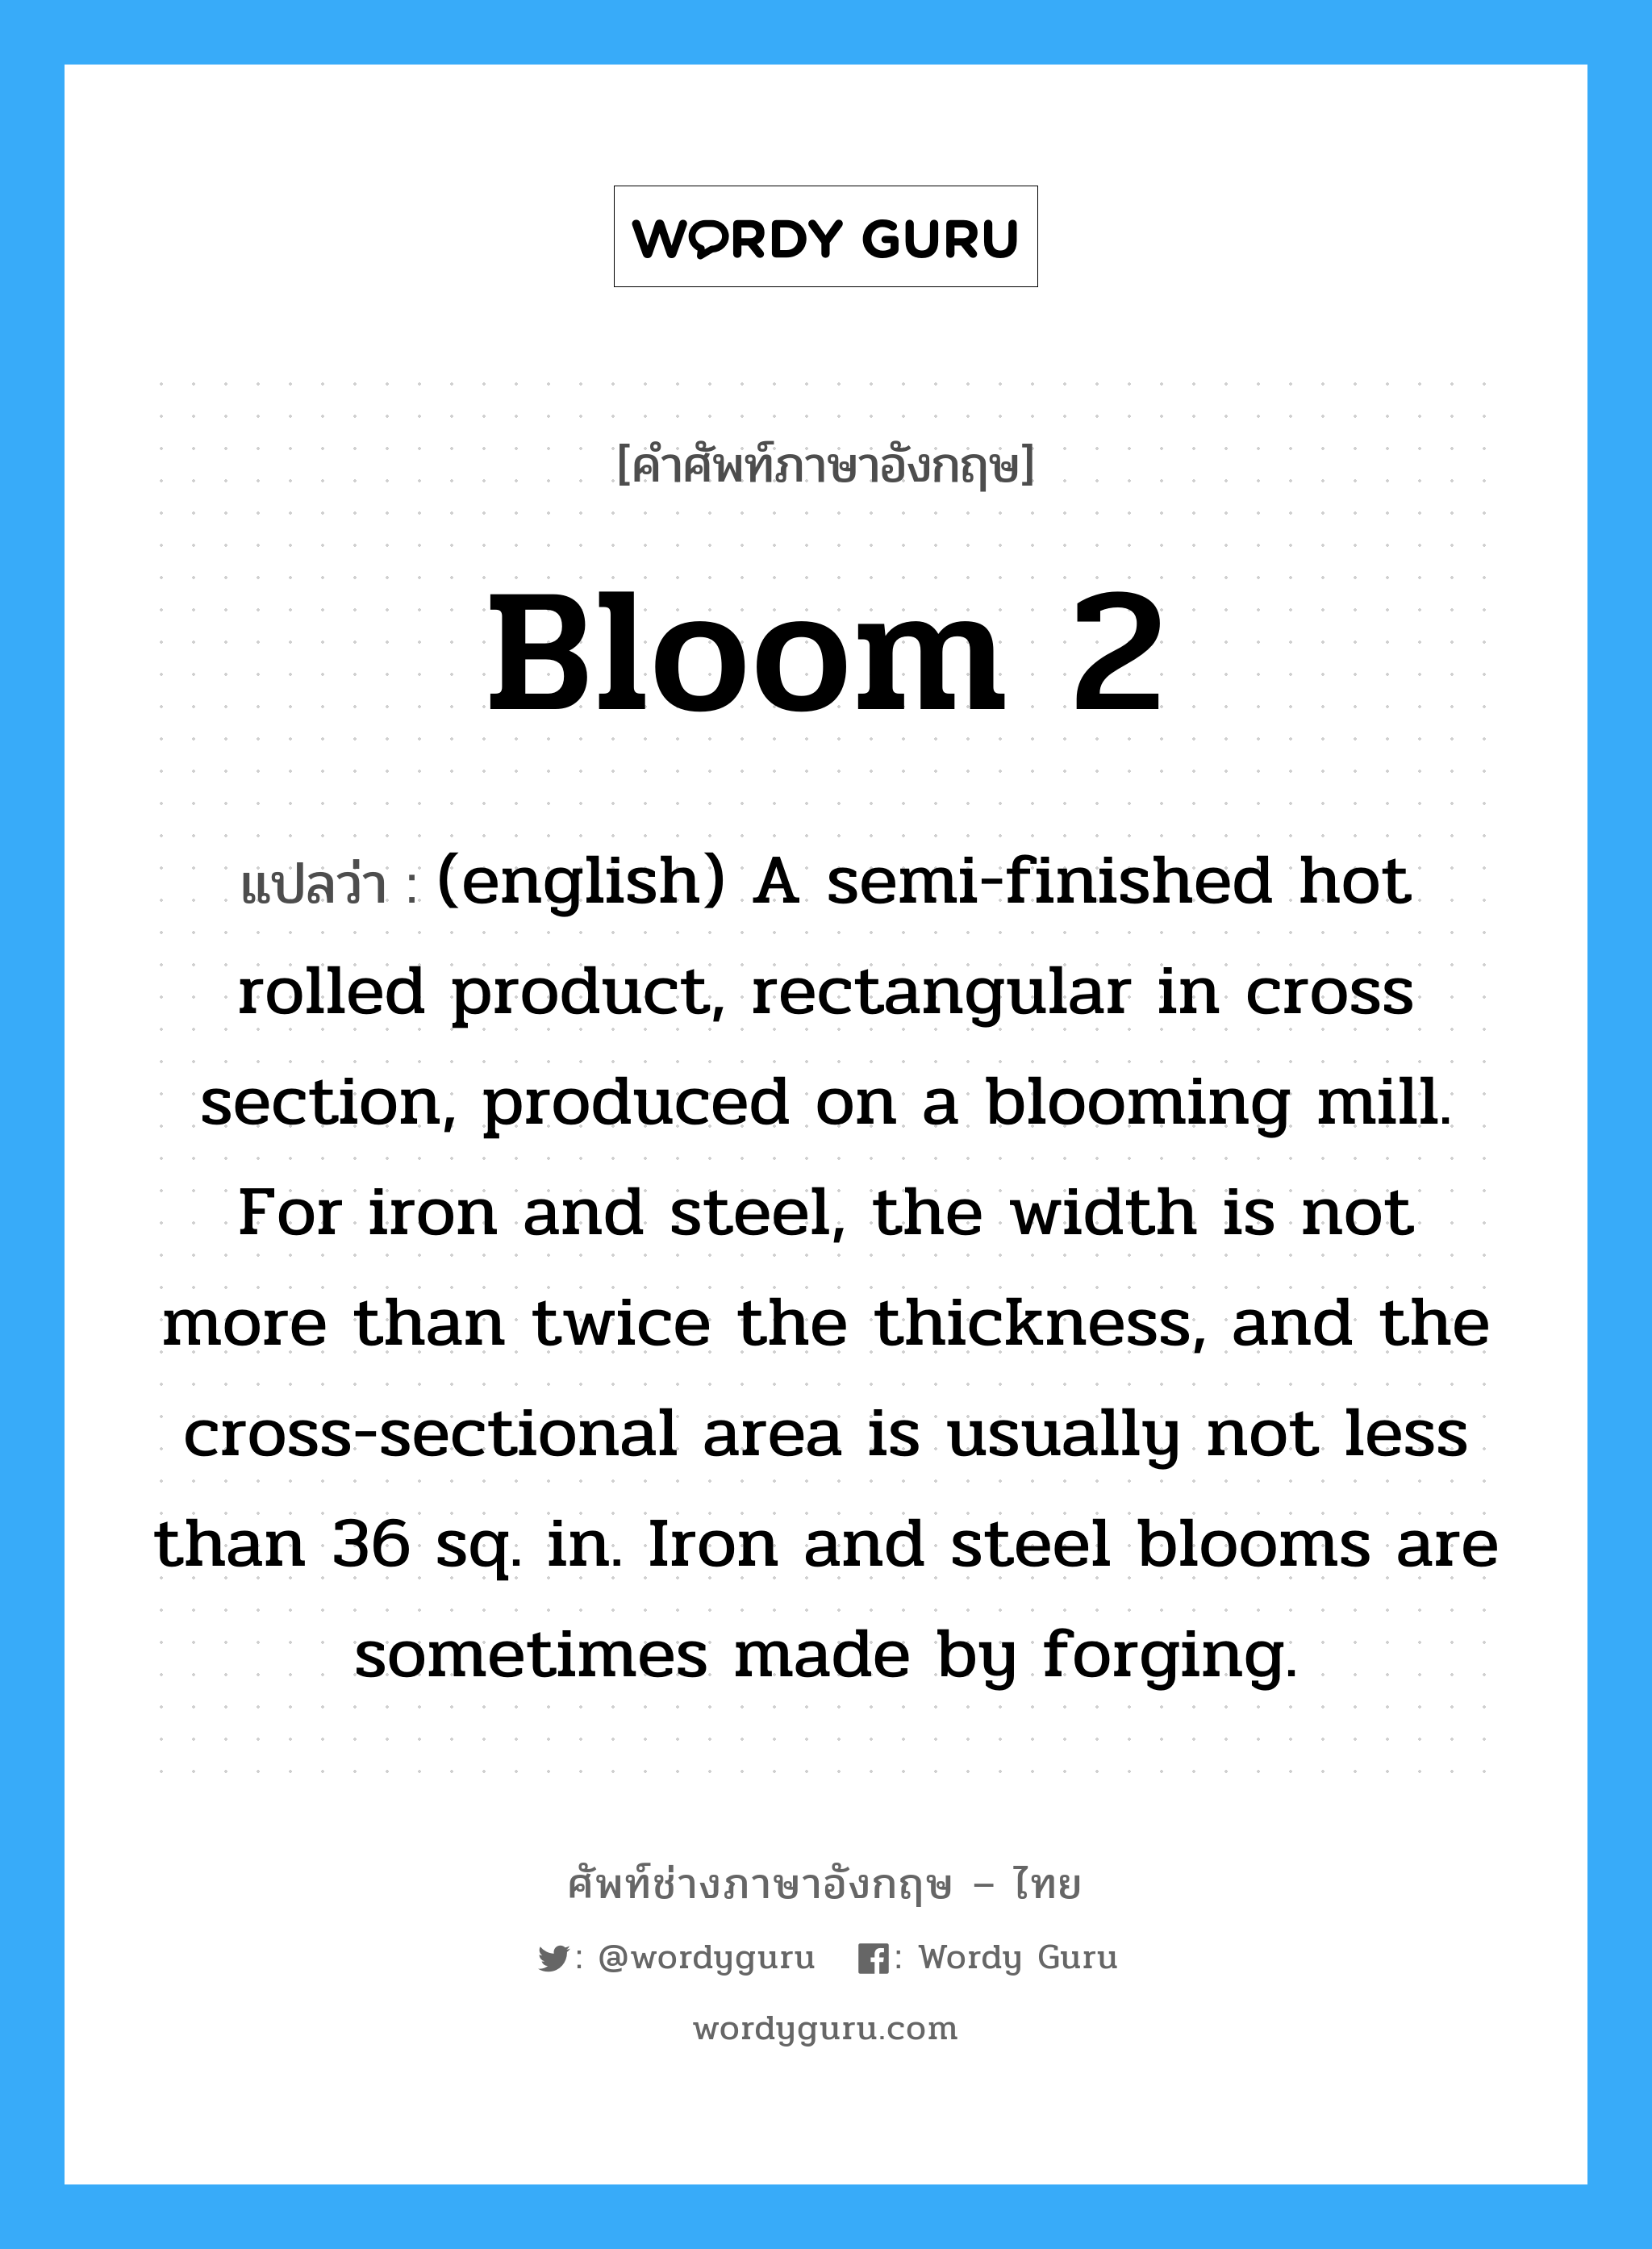 (english) A semi-finished hot rolled product, rectangular in cross section, produced on a blooming mill. For iron and steel, the width is not more than twice the thickness, and the cross-sectional area is usually not less than 36 sq. in. Iron and steel blooms are sometimes made by forging. ภาษาอังกฤษ?, คำศัพท์ช่างภาษาอังกฤษ - ไทย (english) A semi-finished hot rolled product, rectangular in cross section, produced on a blooming mill. For iron and steel, the width is not more than twice the thickness, and the cross-sectional area is usually not less than 36 sq. in. Iron and steel blooms are sometimes made by forging. คำศัพท์ภาษาอังกฤษ (english) A semi-finished hot rolled product, rectangular in cross section, produced on a blooming mill. For iron and steel, the width is not more than twice the thickness, and the cross-sectional area is usually not less than 36 sq. in. Iron and steel blooms are sometimes made by forging. แปลว่า Bloom 2